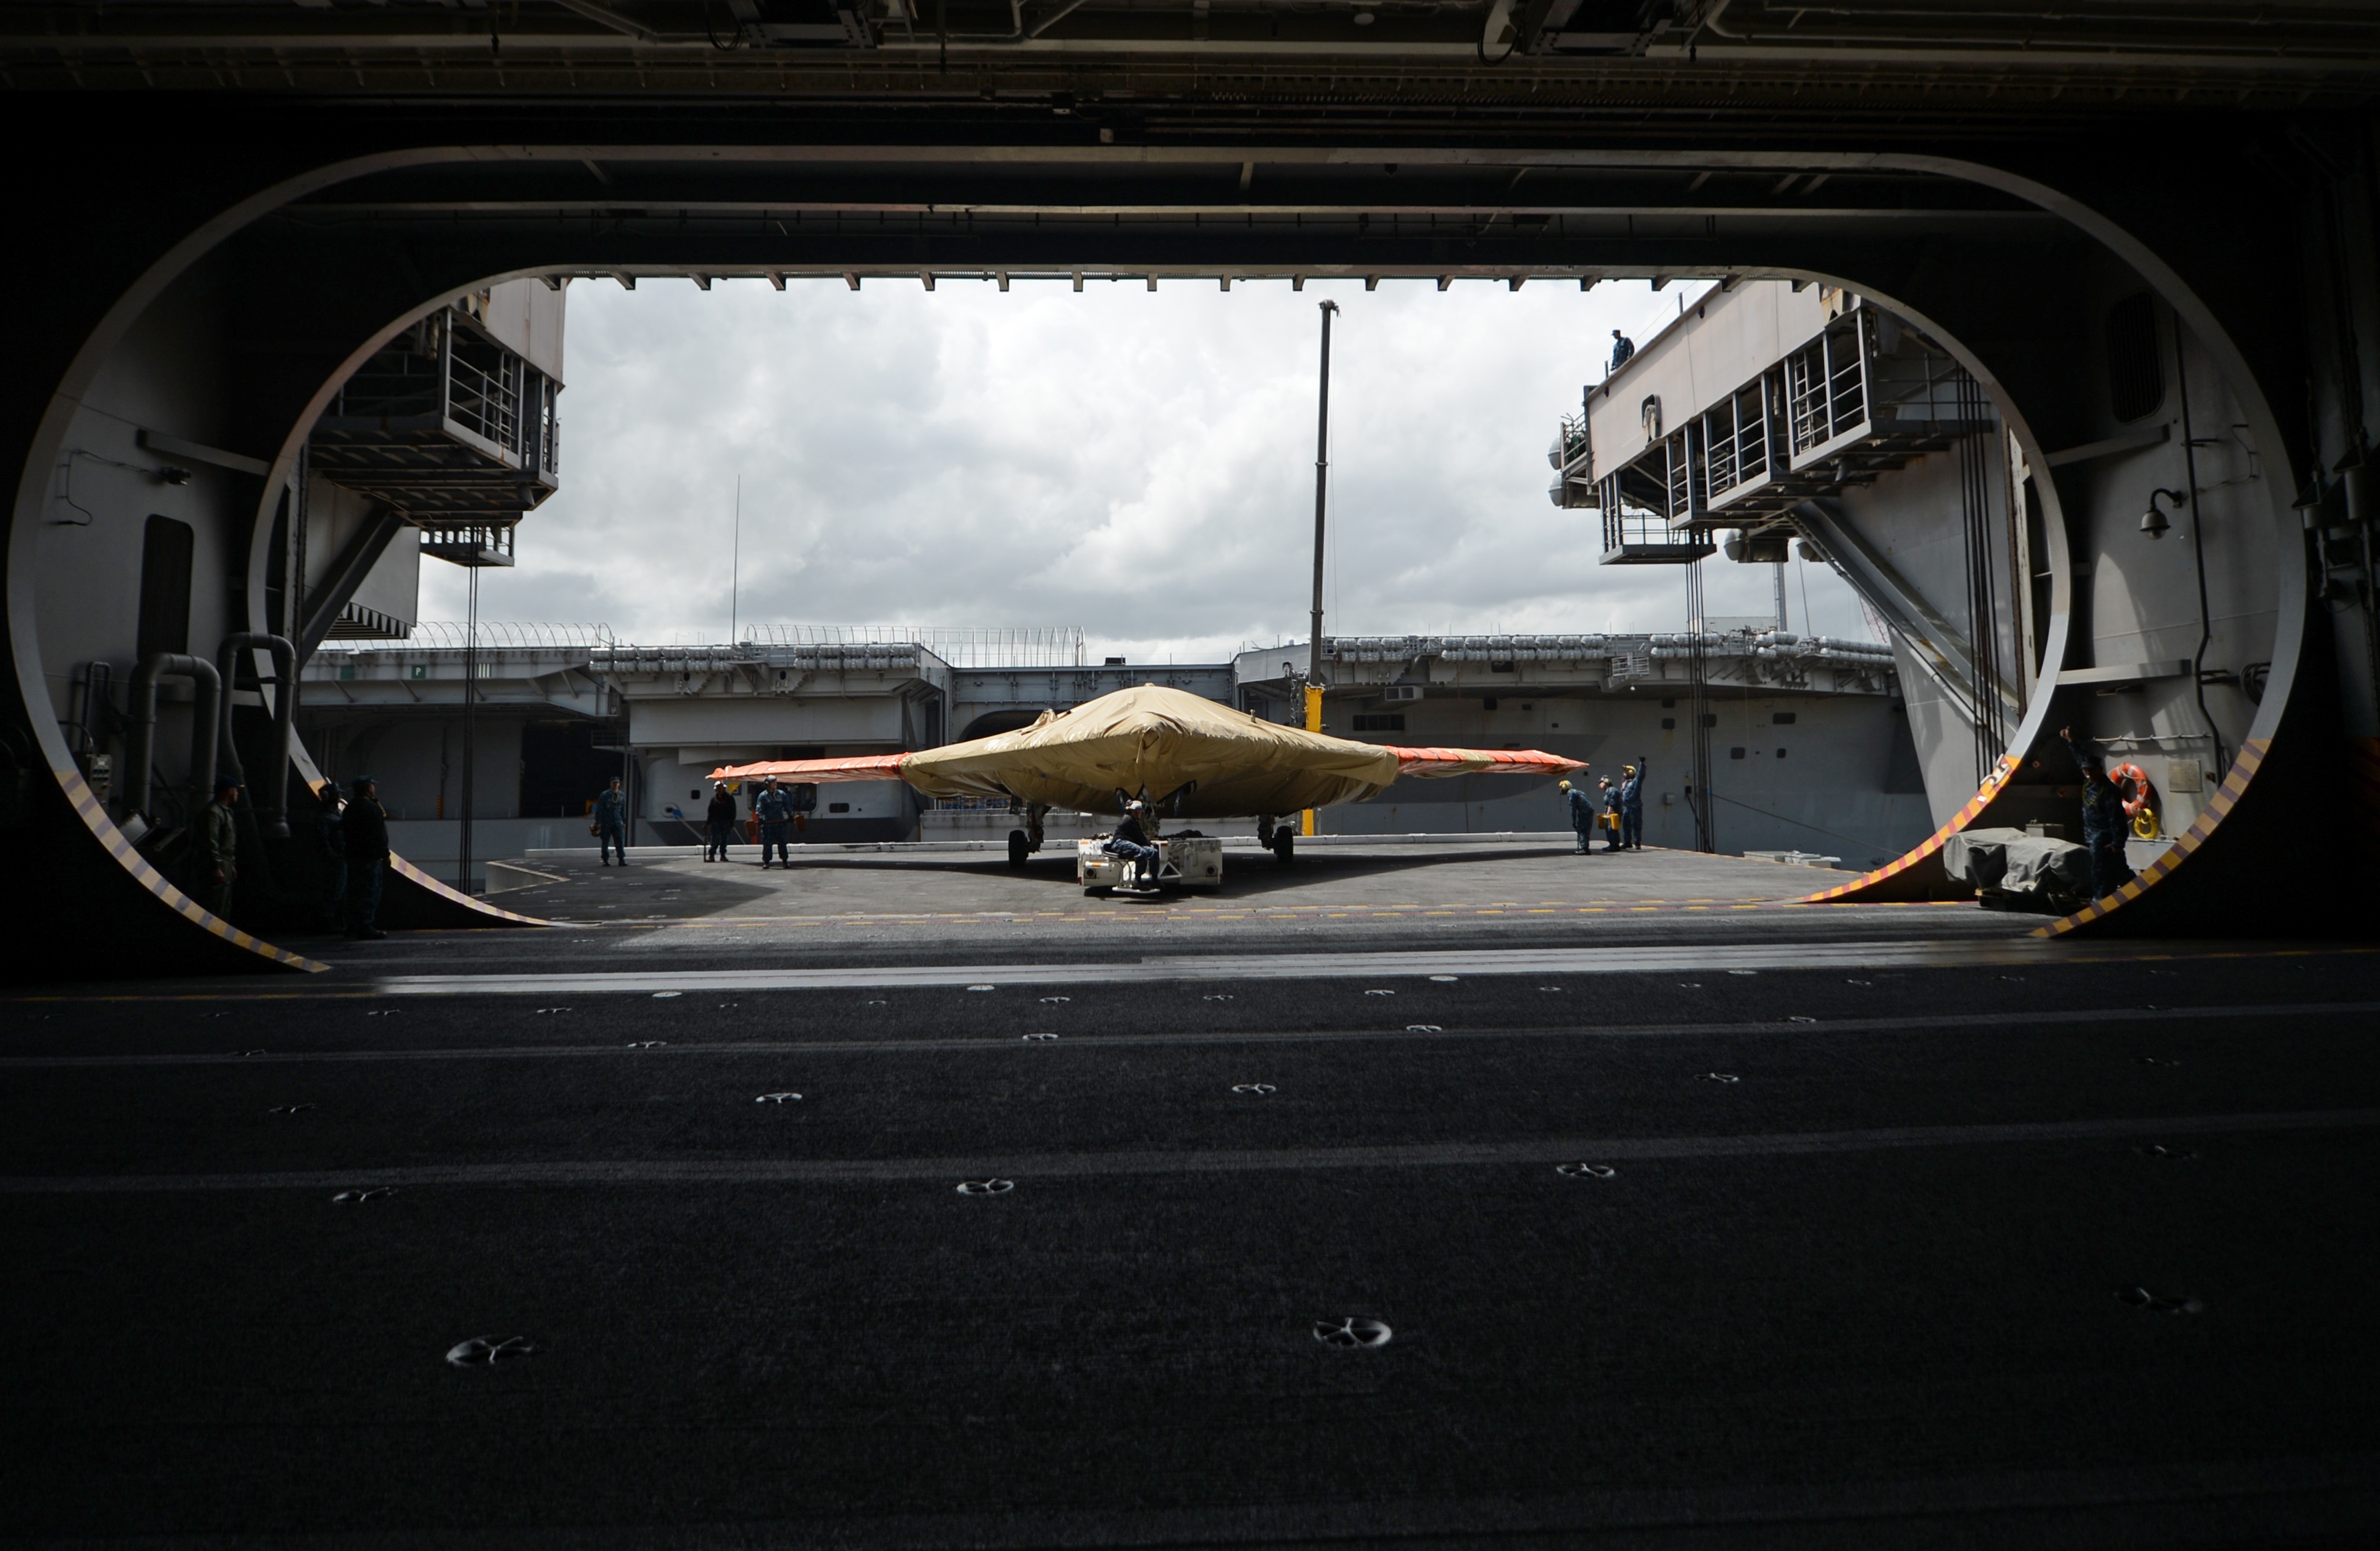 An X-47B Unmanned Combat Air System (UCAS) demonstrator sits on an aircraft elevator of the aircraft carrier USS George H.W. Bush (CVN-77) on May 6, 2013. US Navy Photo